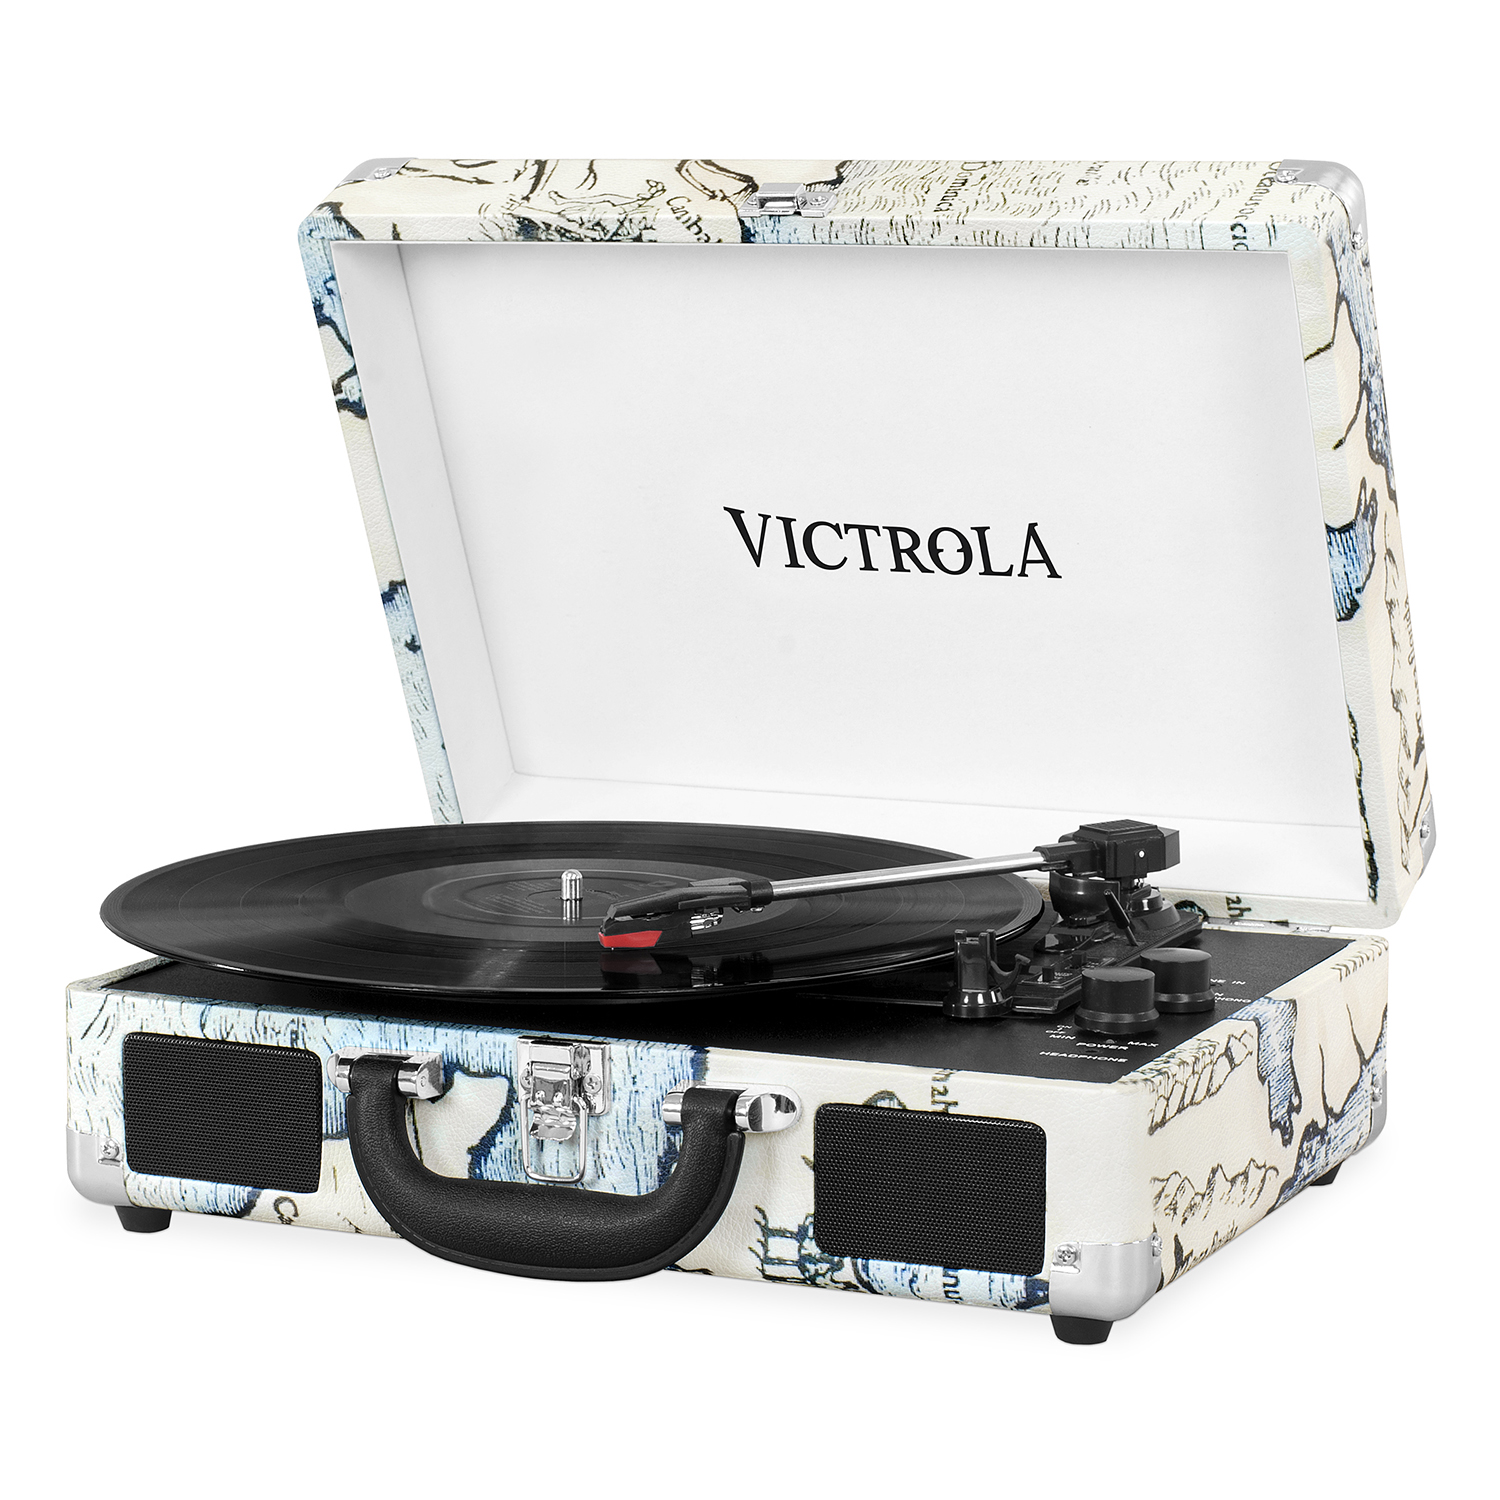 VSC-550BT-P4, suitcase record player 3-speed stereo speakers, BT,immit. leather, map print